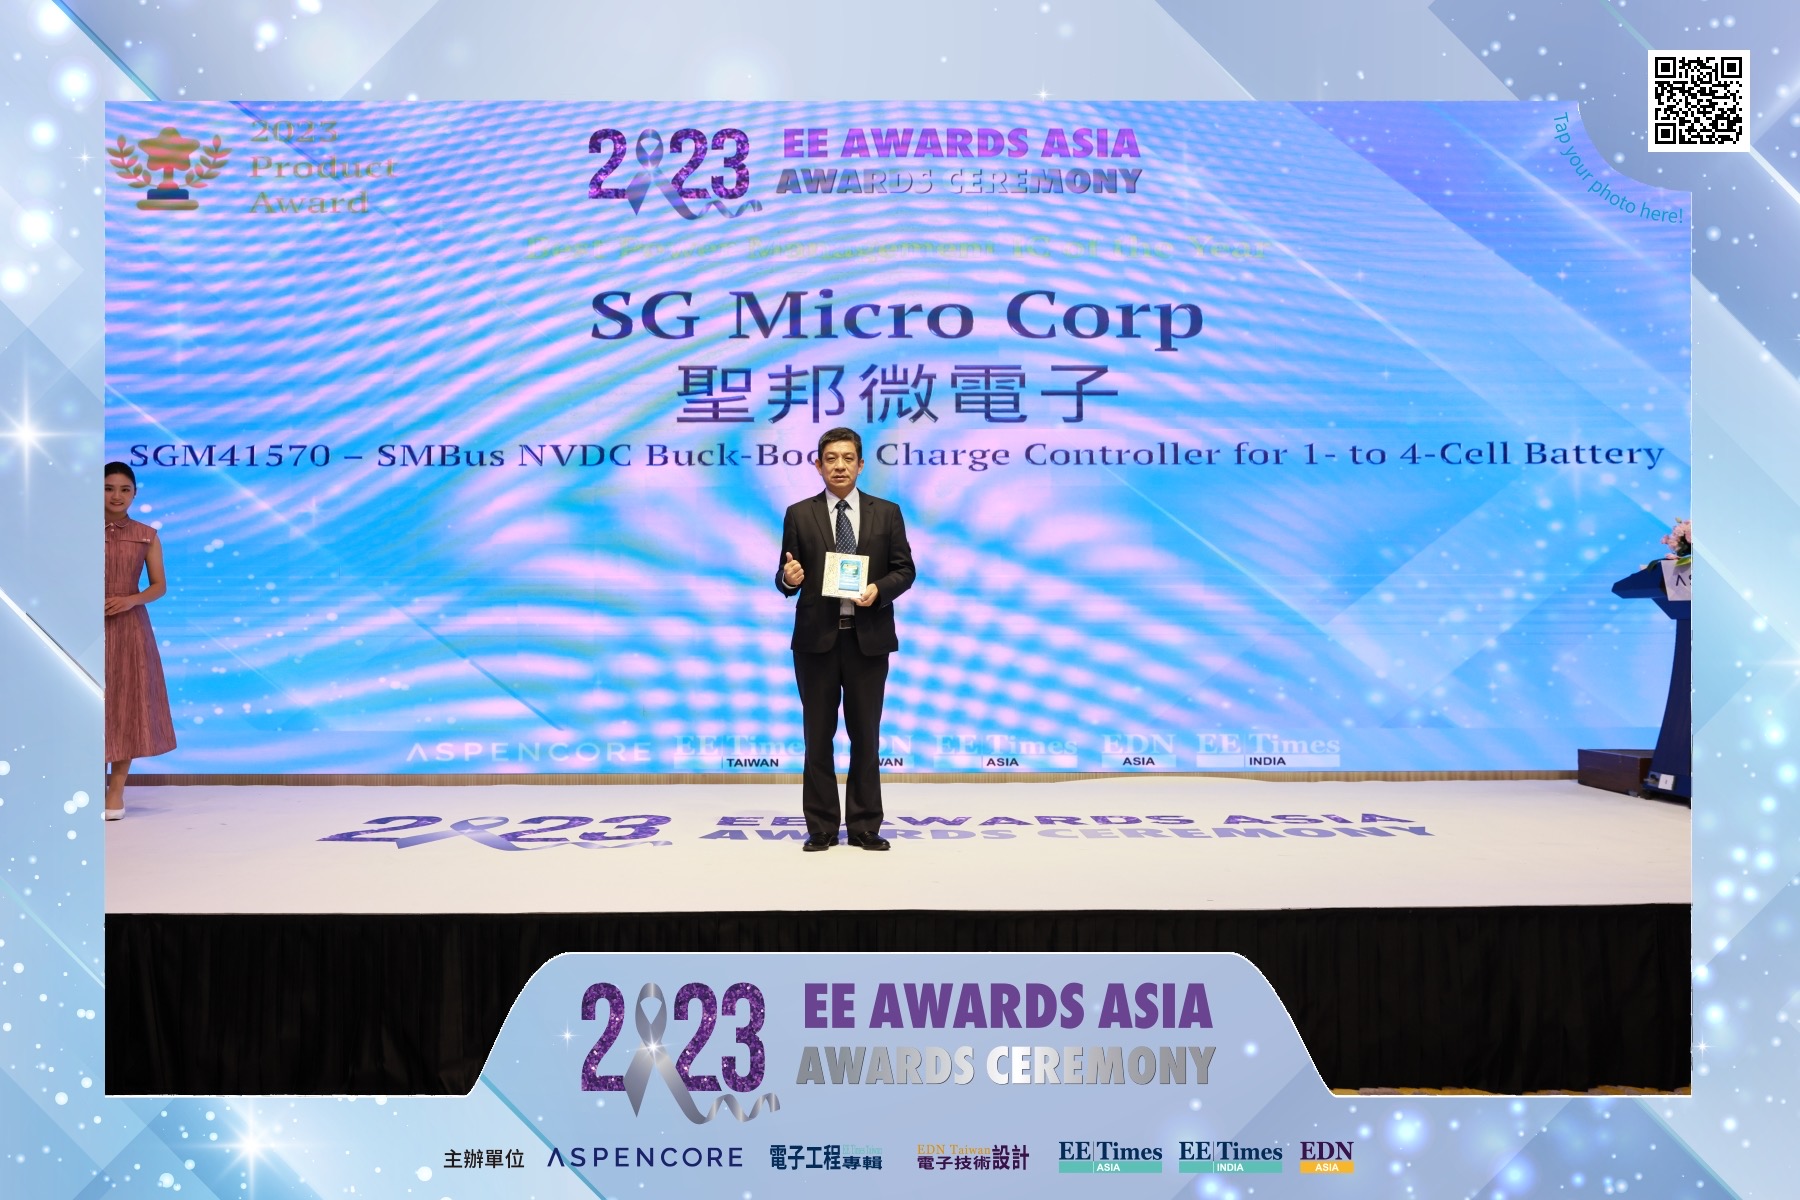 SGM41570 won "Best Power Management IC of the Year"